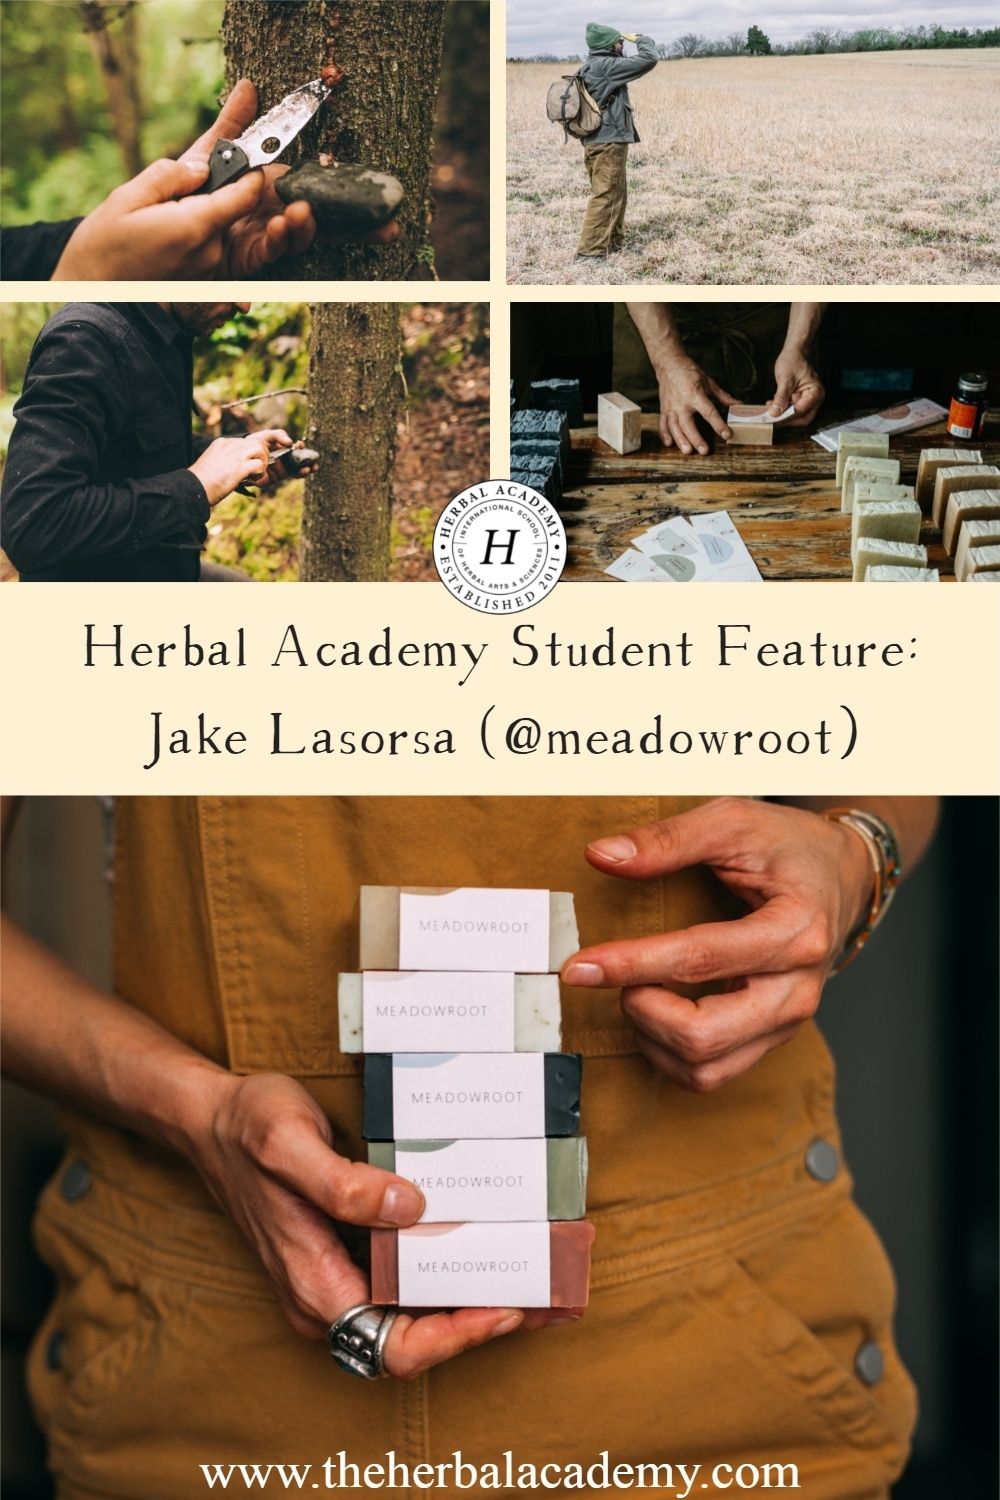 Herbal Academy Student Feature: Jake Lasorsa (@meadowroot) | Herbal Academy | This student interview features Herbal Academy graduate, Jake Lasorsa, who incorporates herbs into his handmade soap business, Meadowroot.